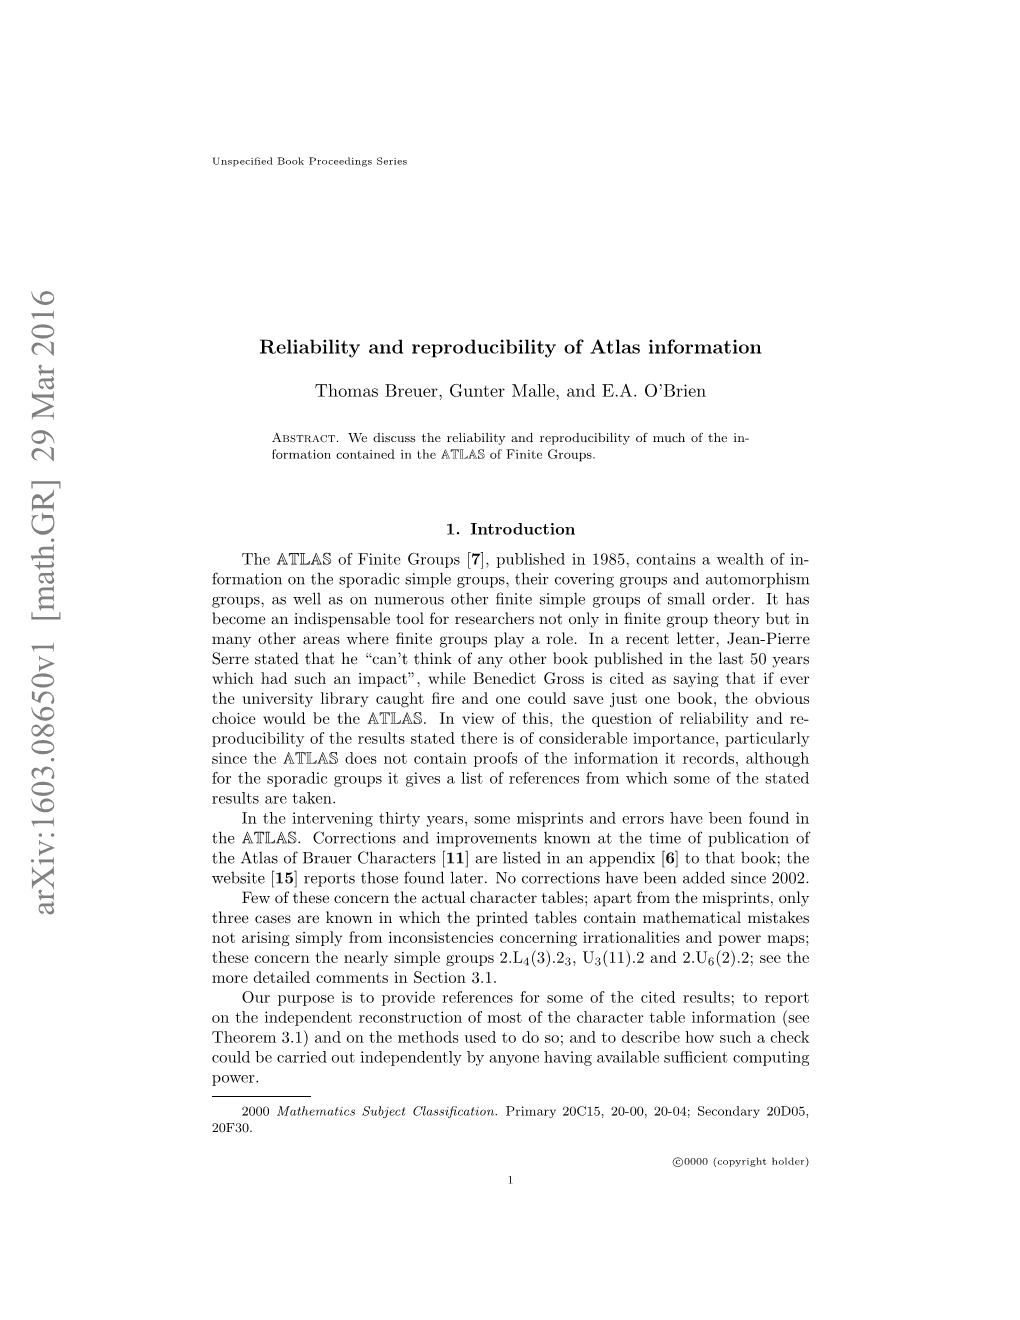 Reliability and Reproducibility of Atlas Information 3